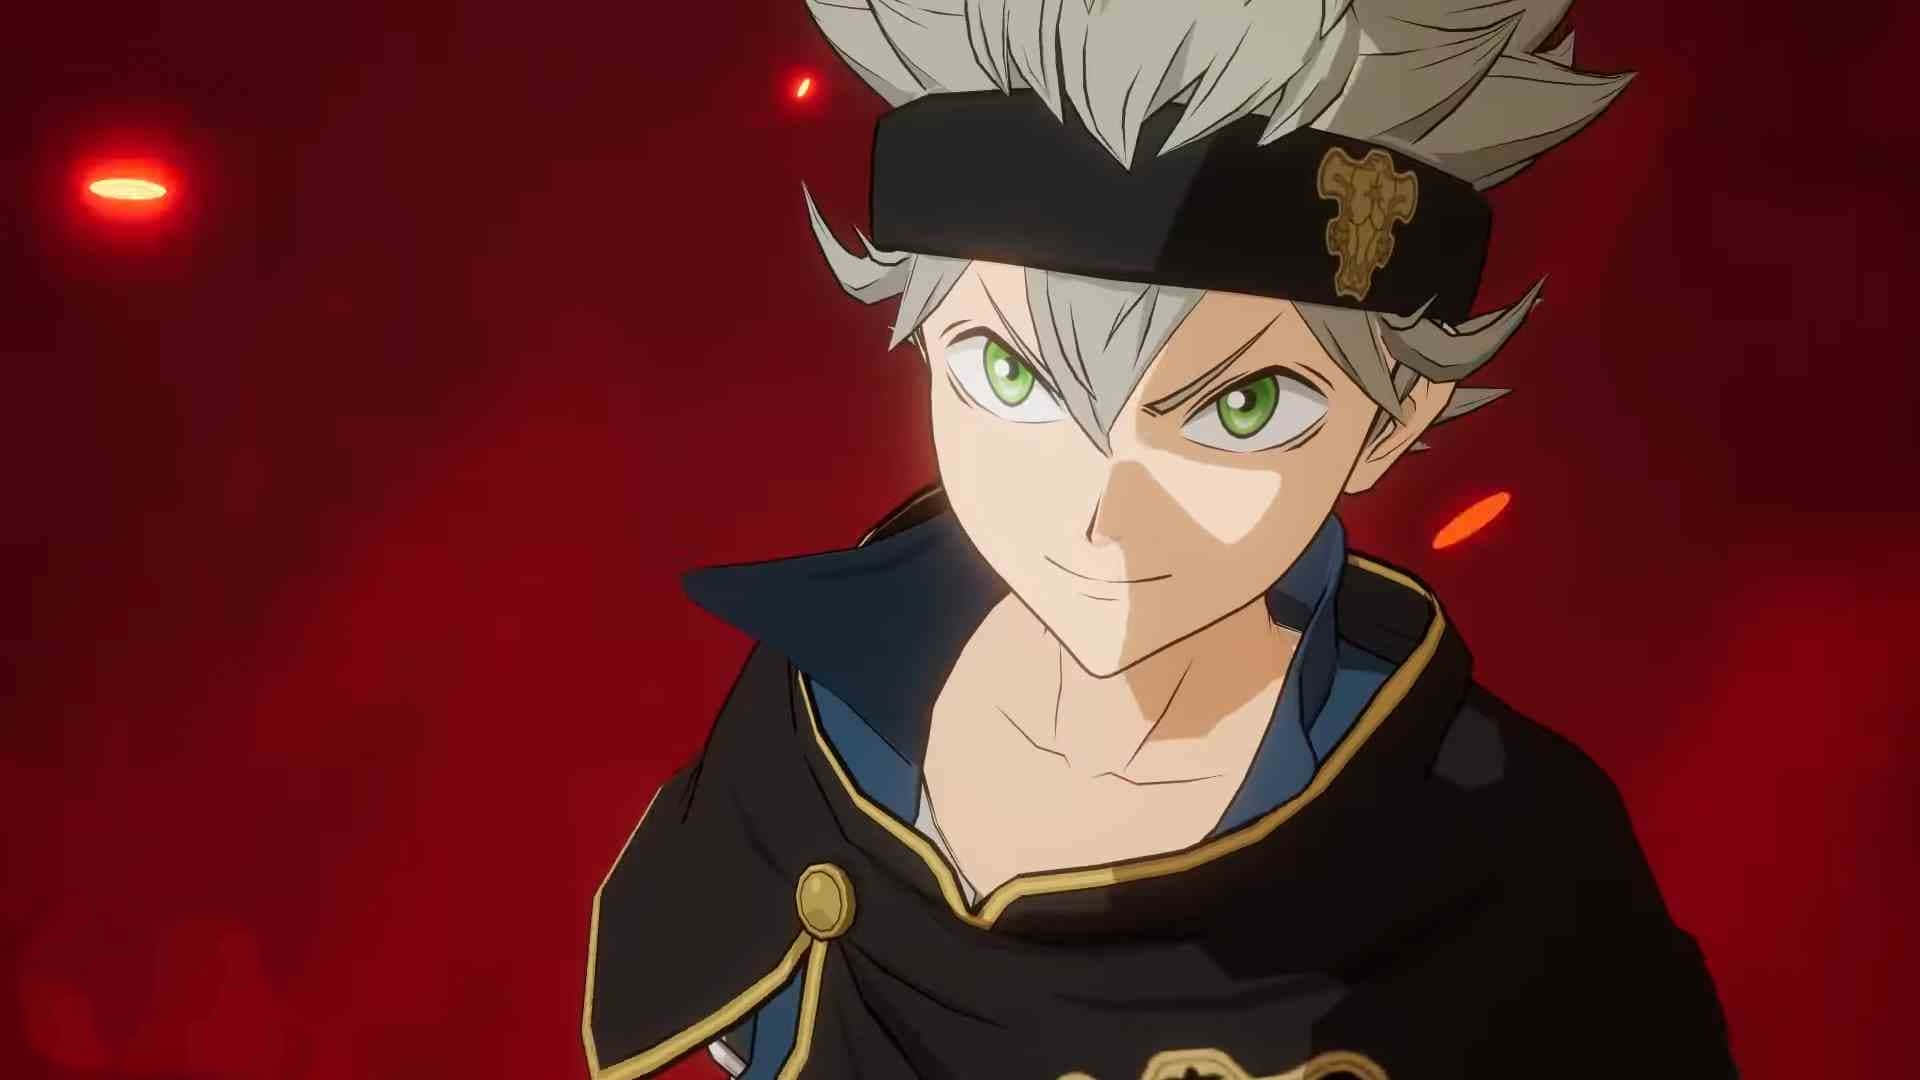 Get ready for an adventure with the Black Clover Quartet